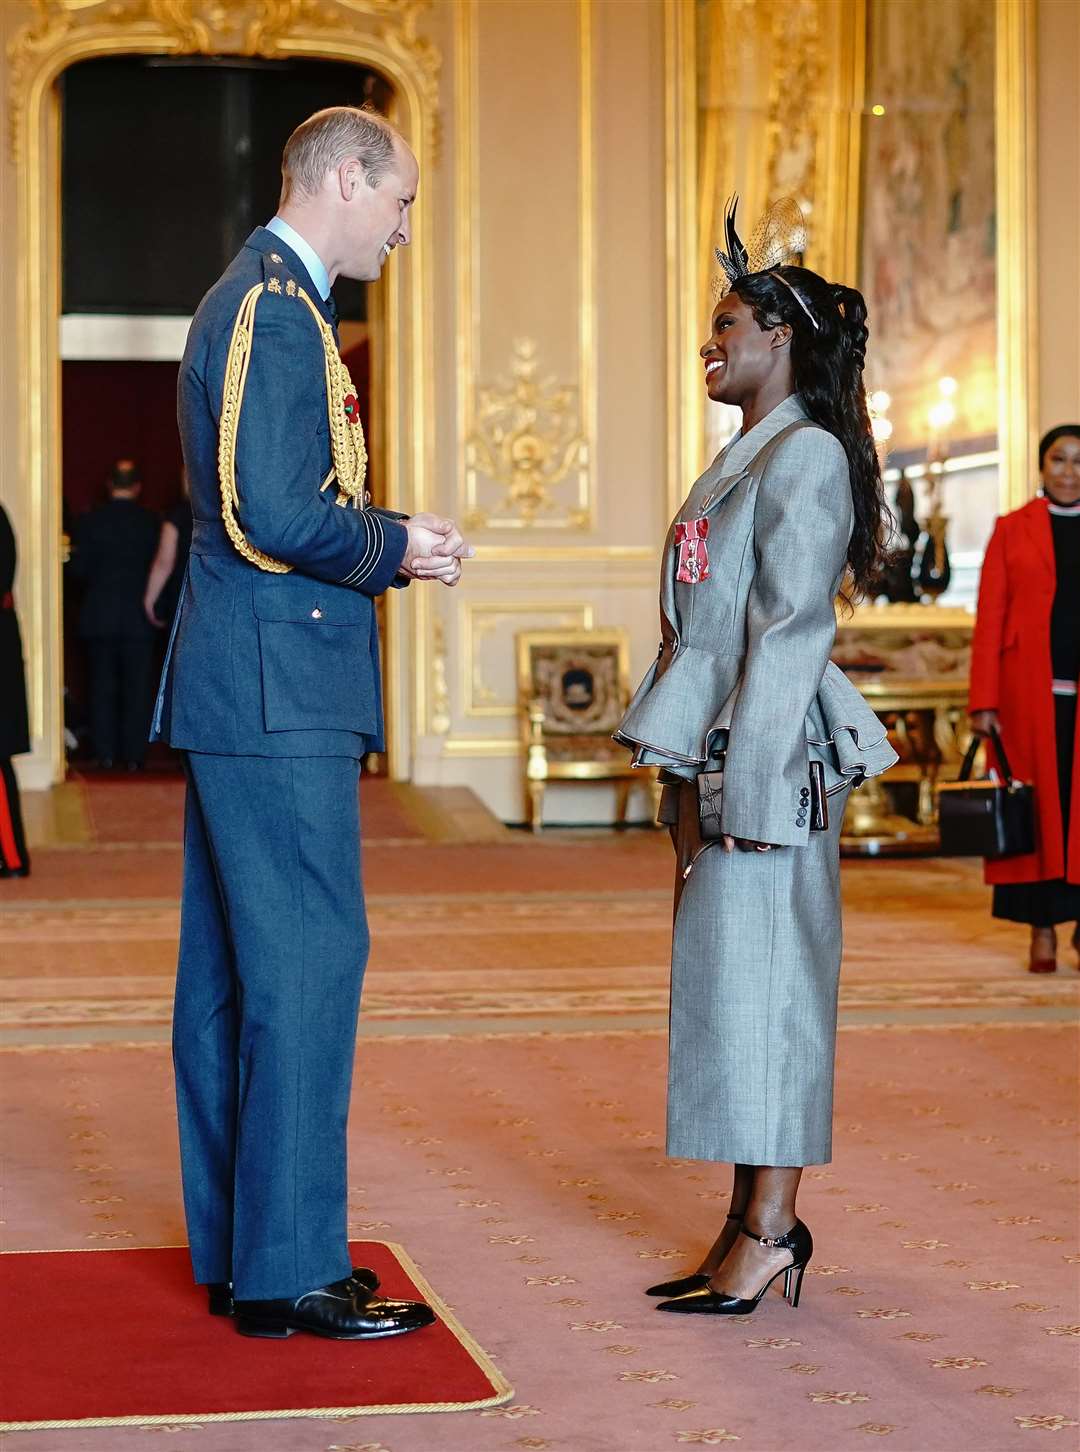 Eniola Aluko was given her MBE at Windsor Castle by the Prince of Wales (Aaron Chown/PA)